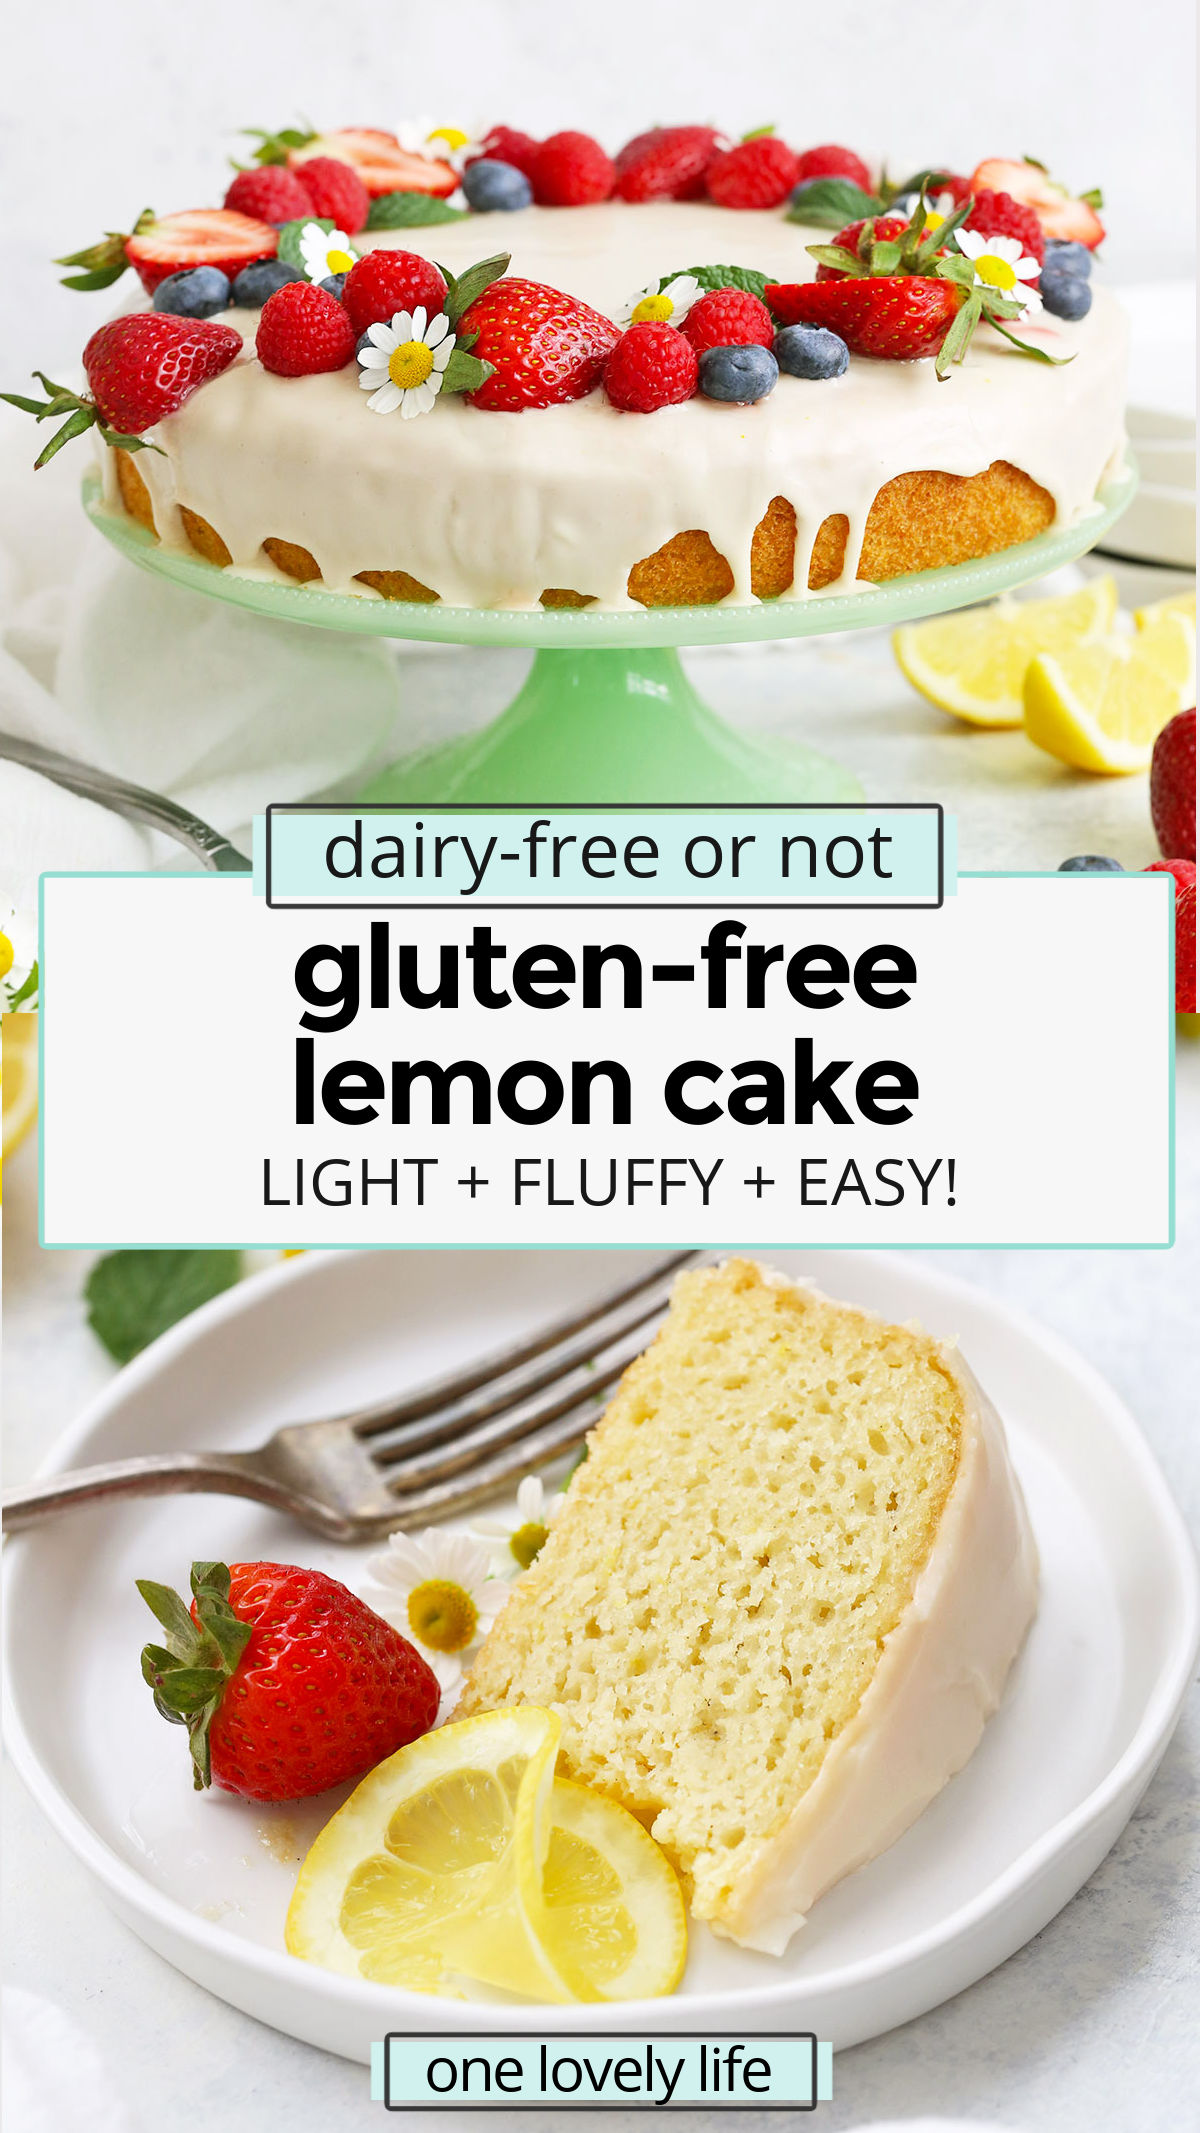 Gluten Free Lemon Cake - This bright, tangy gluten free lemon cake is like eating a bite of sunshine. Gluten free, dairy free, and absolutely delicious. // gluten free lemon cake recipe // dairy free lemon cake recipe // lemon cake recipe // easter dessert // spring dessert // spring cake // summer cake // gluten-free Easter dessert // gluten-free Easter cake